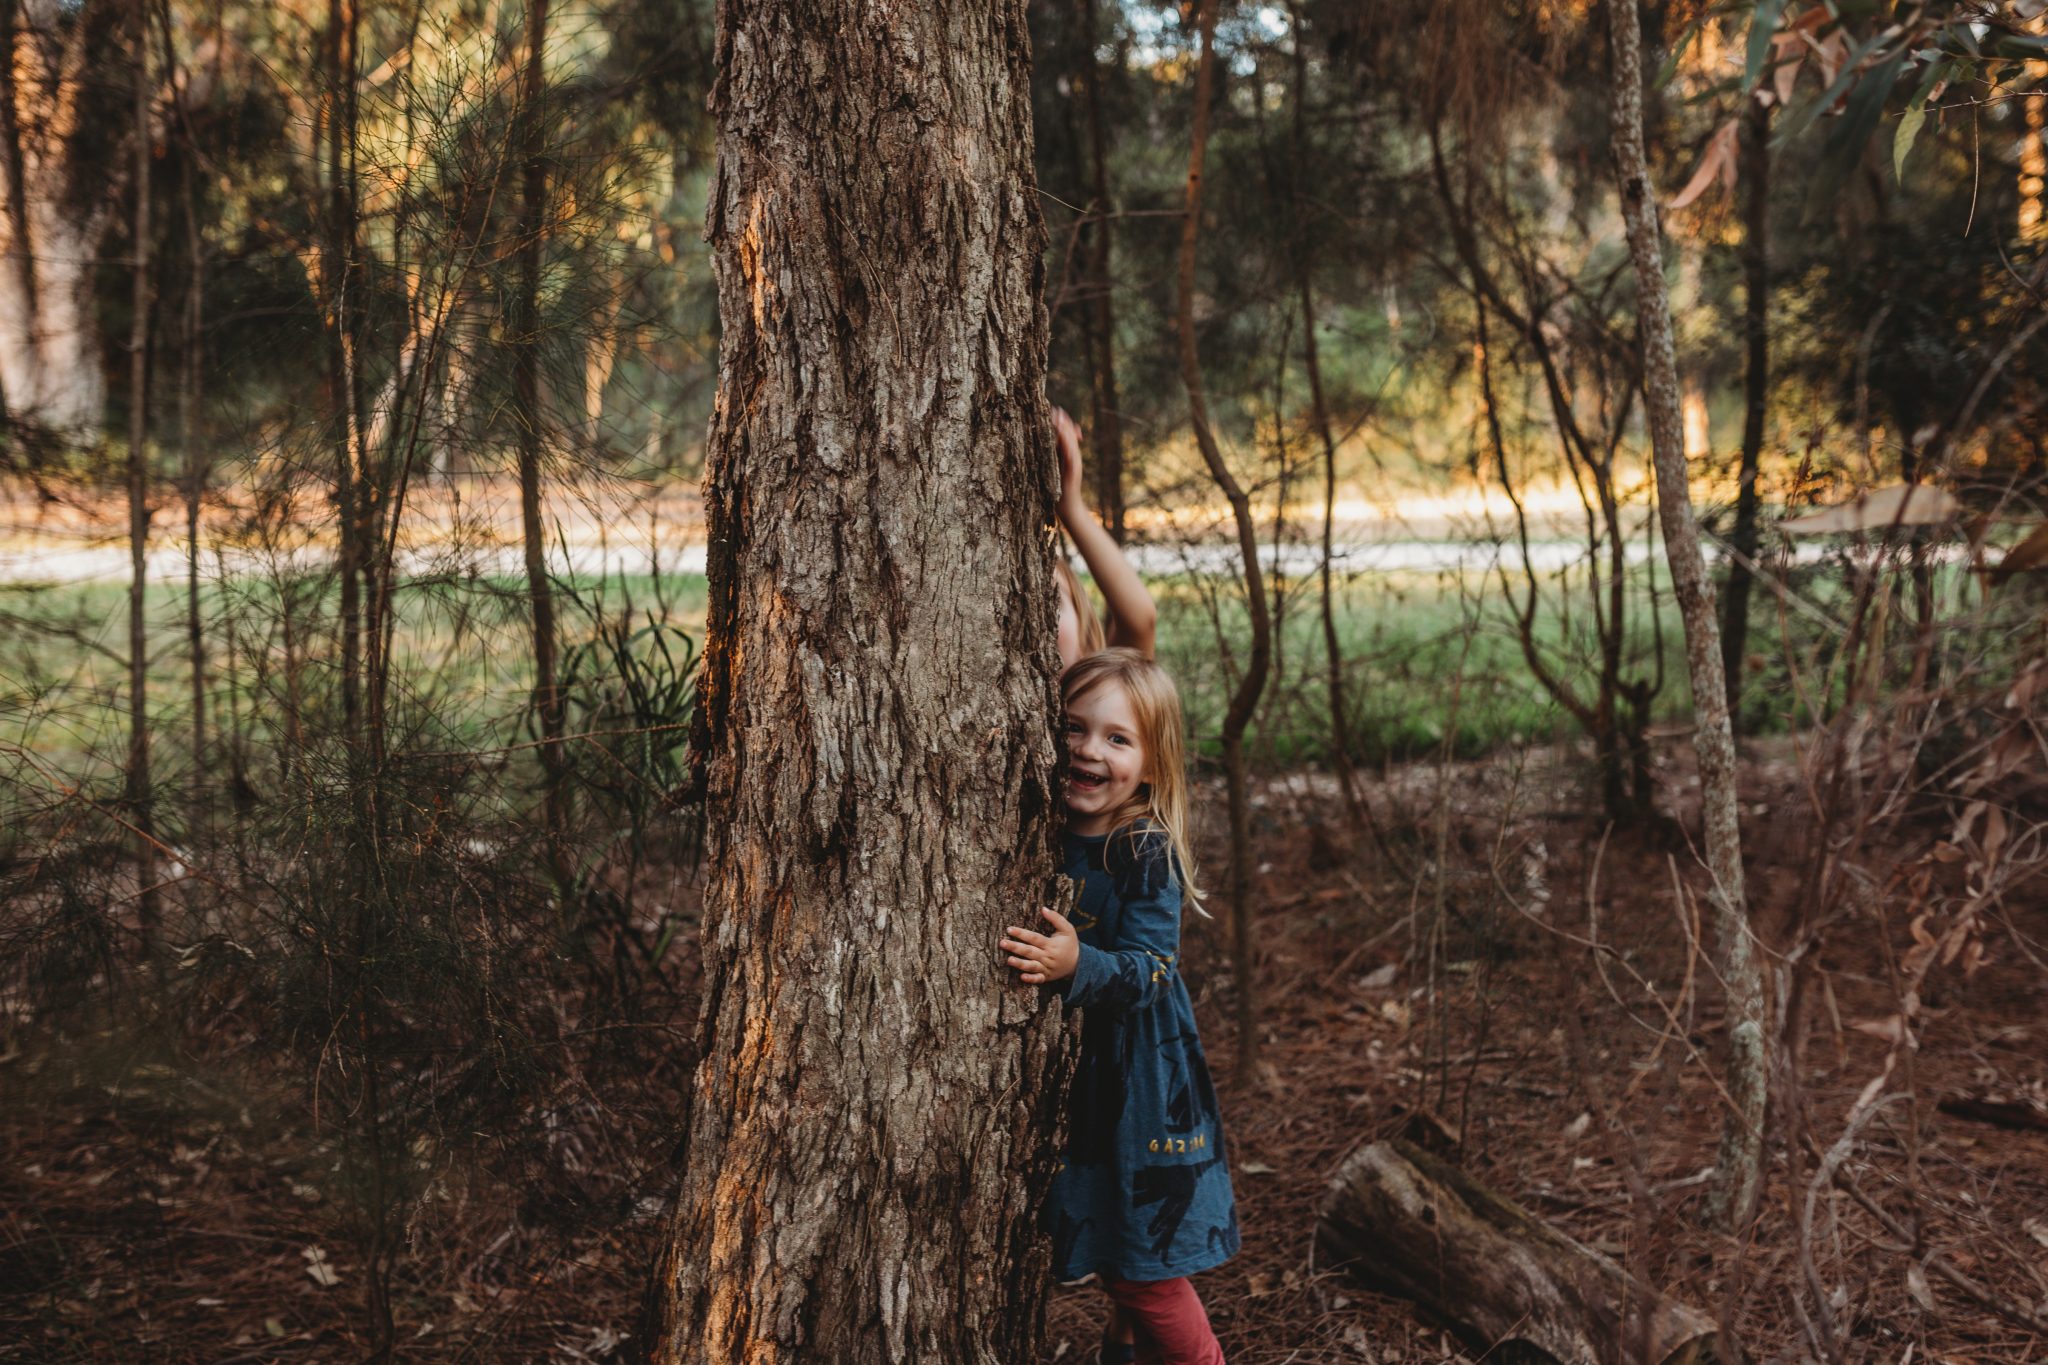 Young girl smiles while peeking out from behind a tree during family photo session at Croudace Bay park